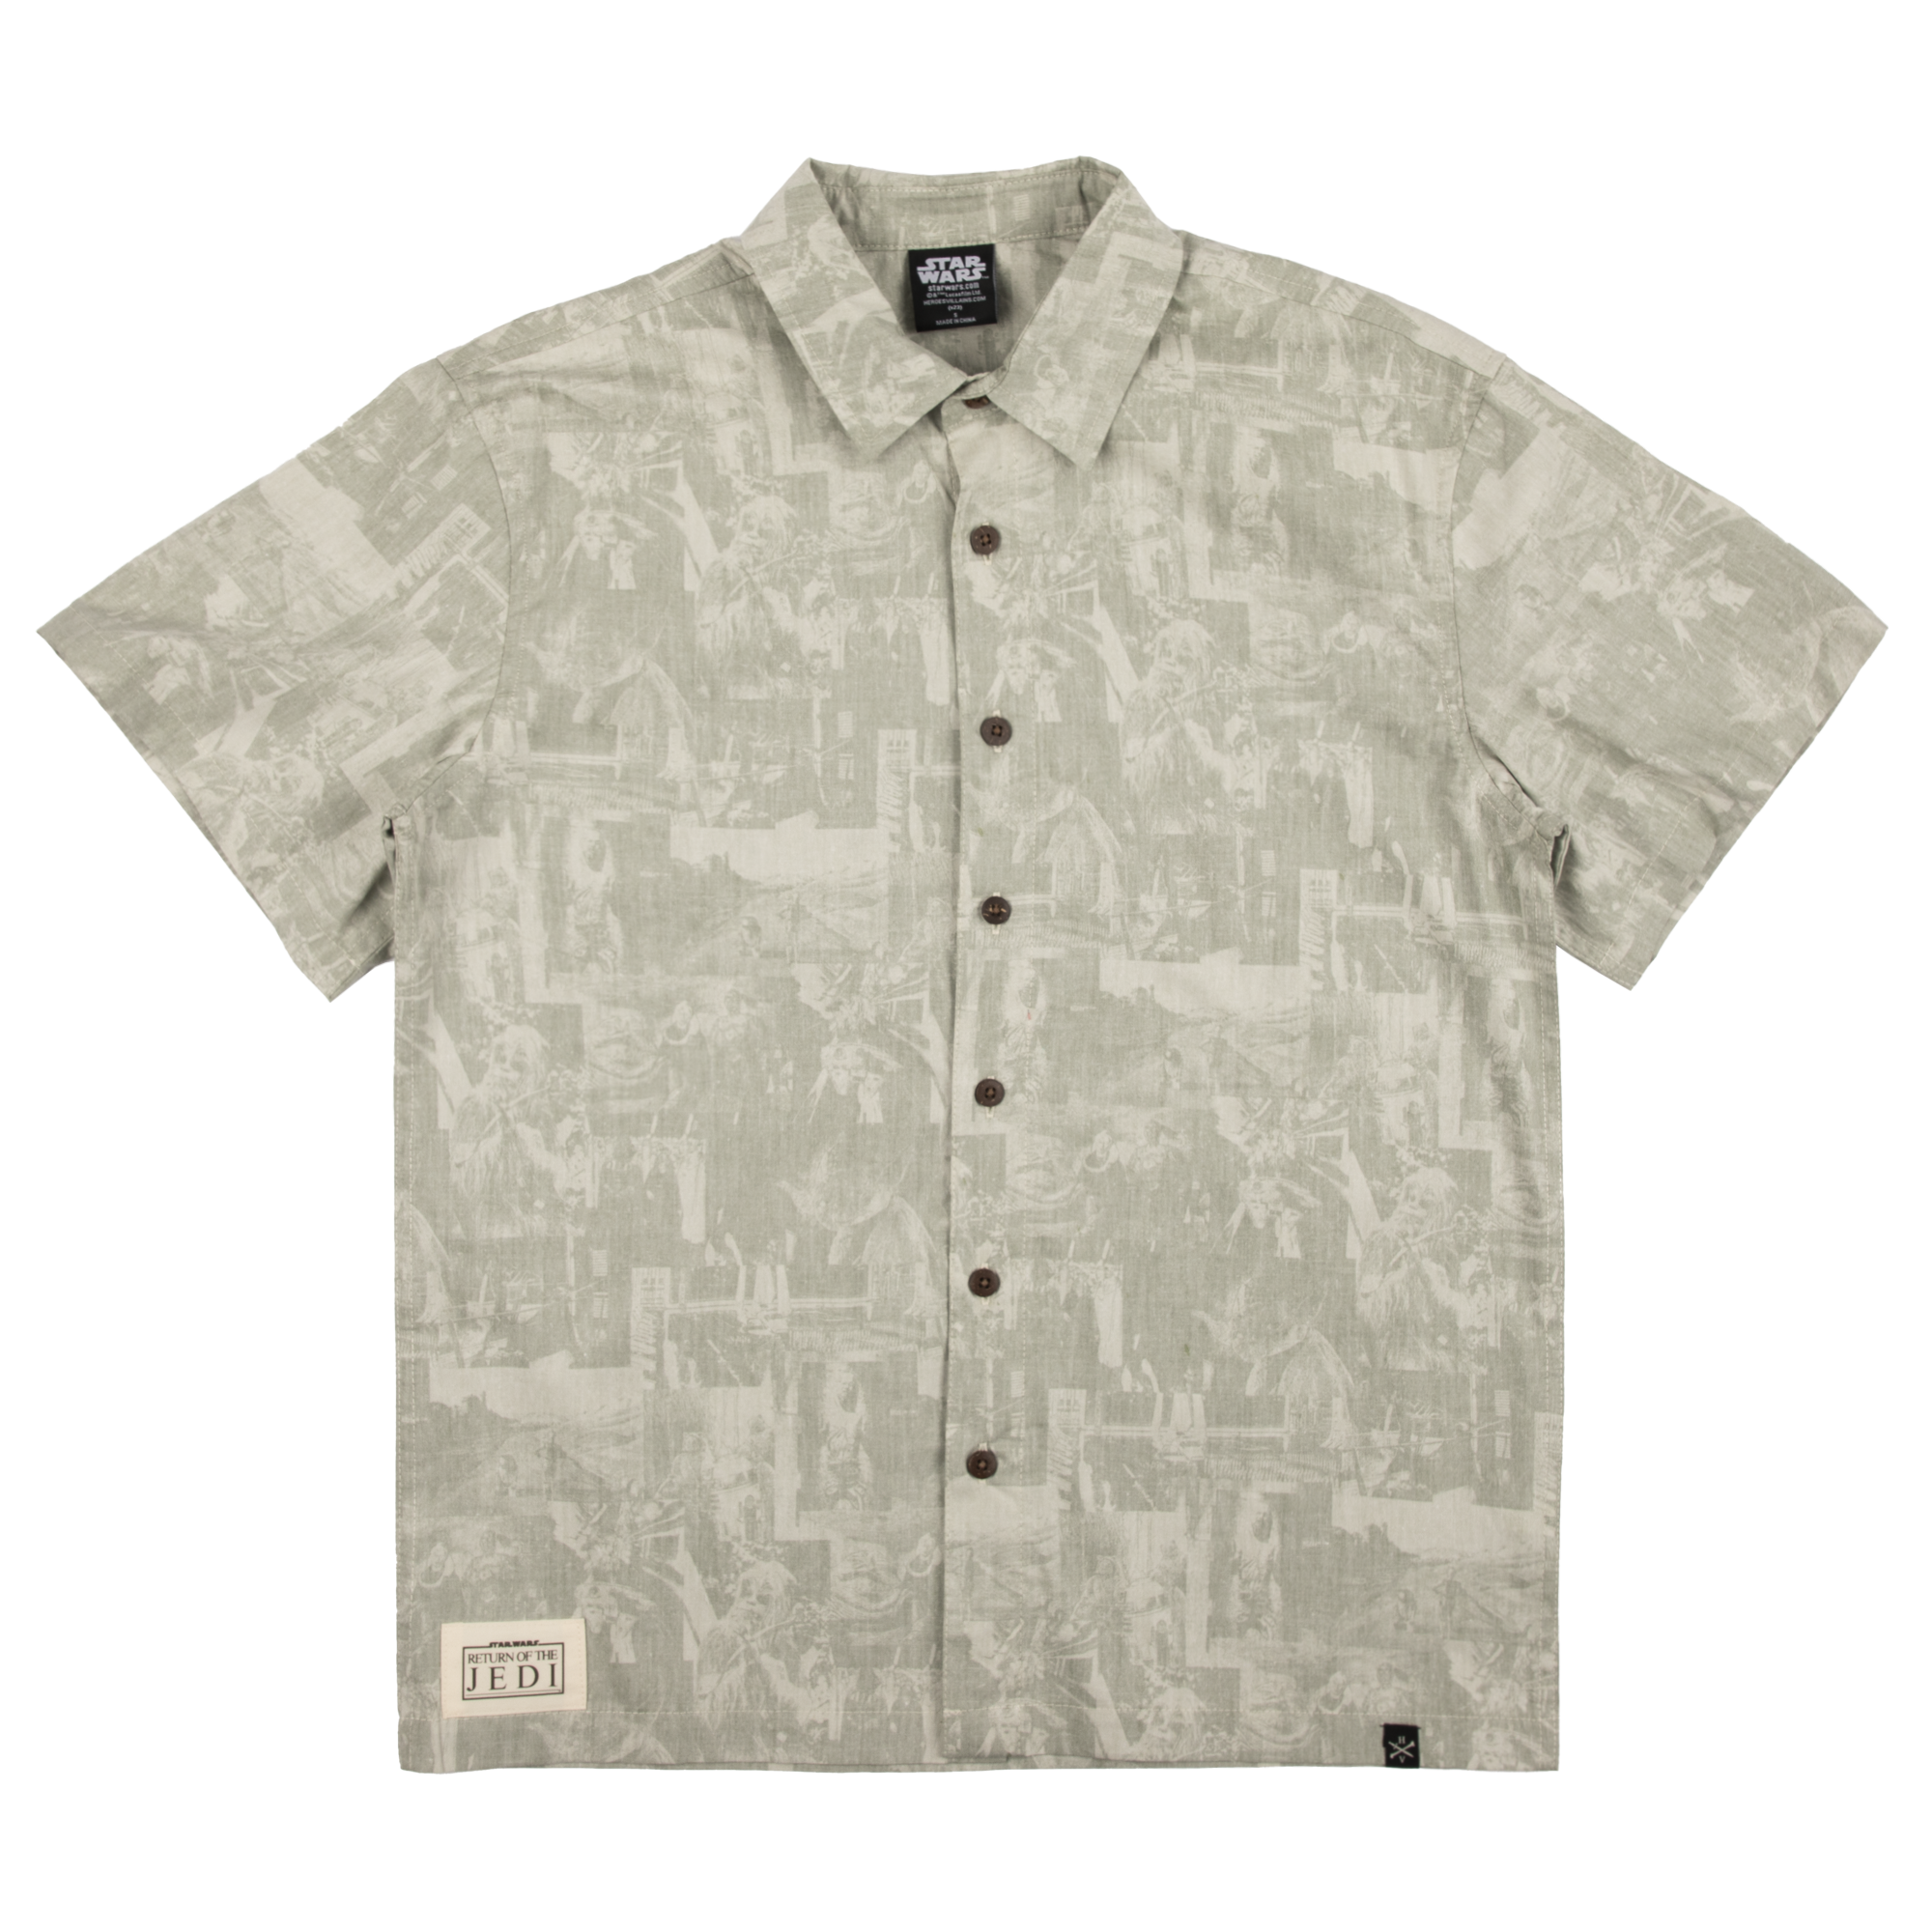 Return of the Jedi All Over Film Print Button-Down Shirt